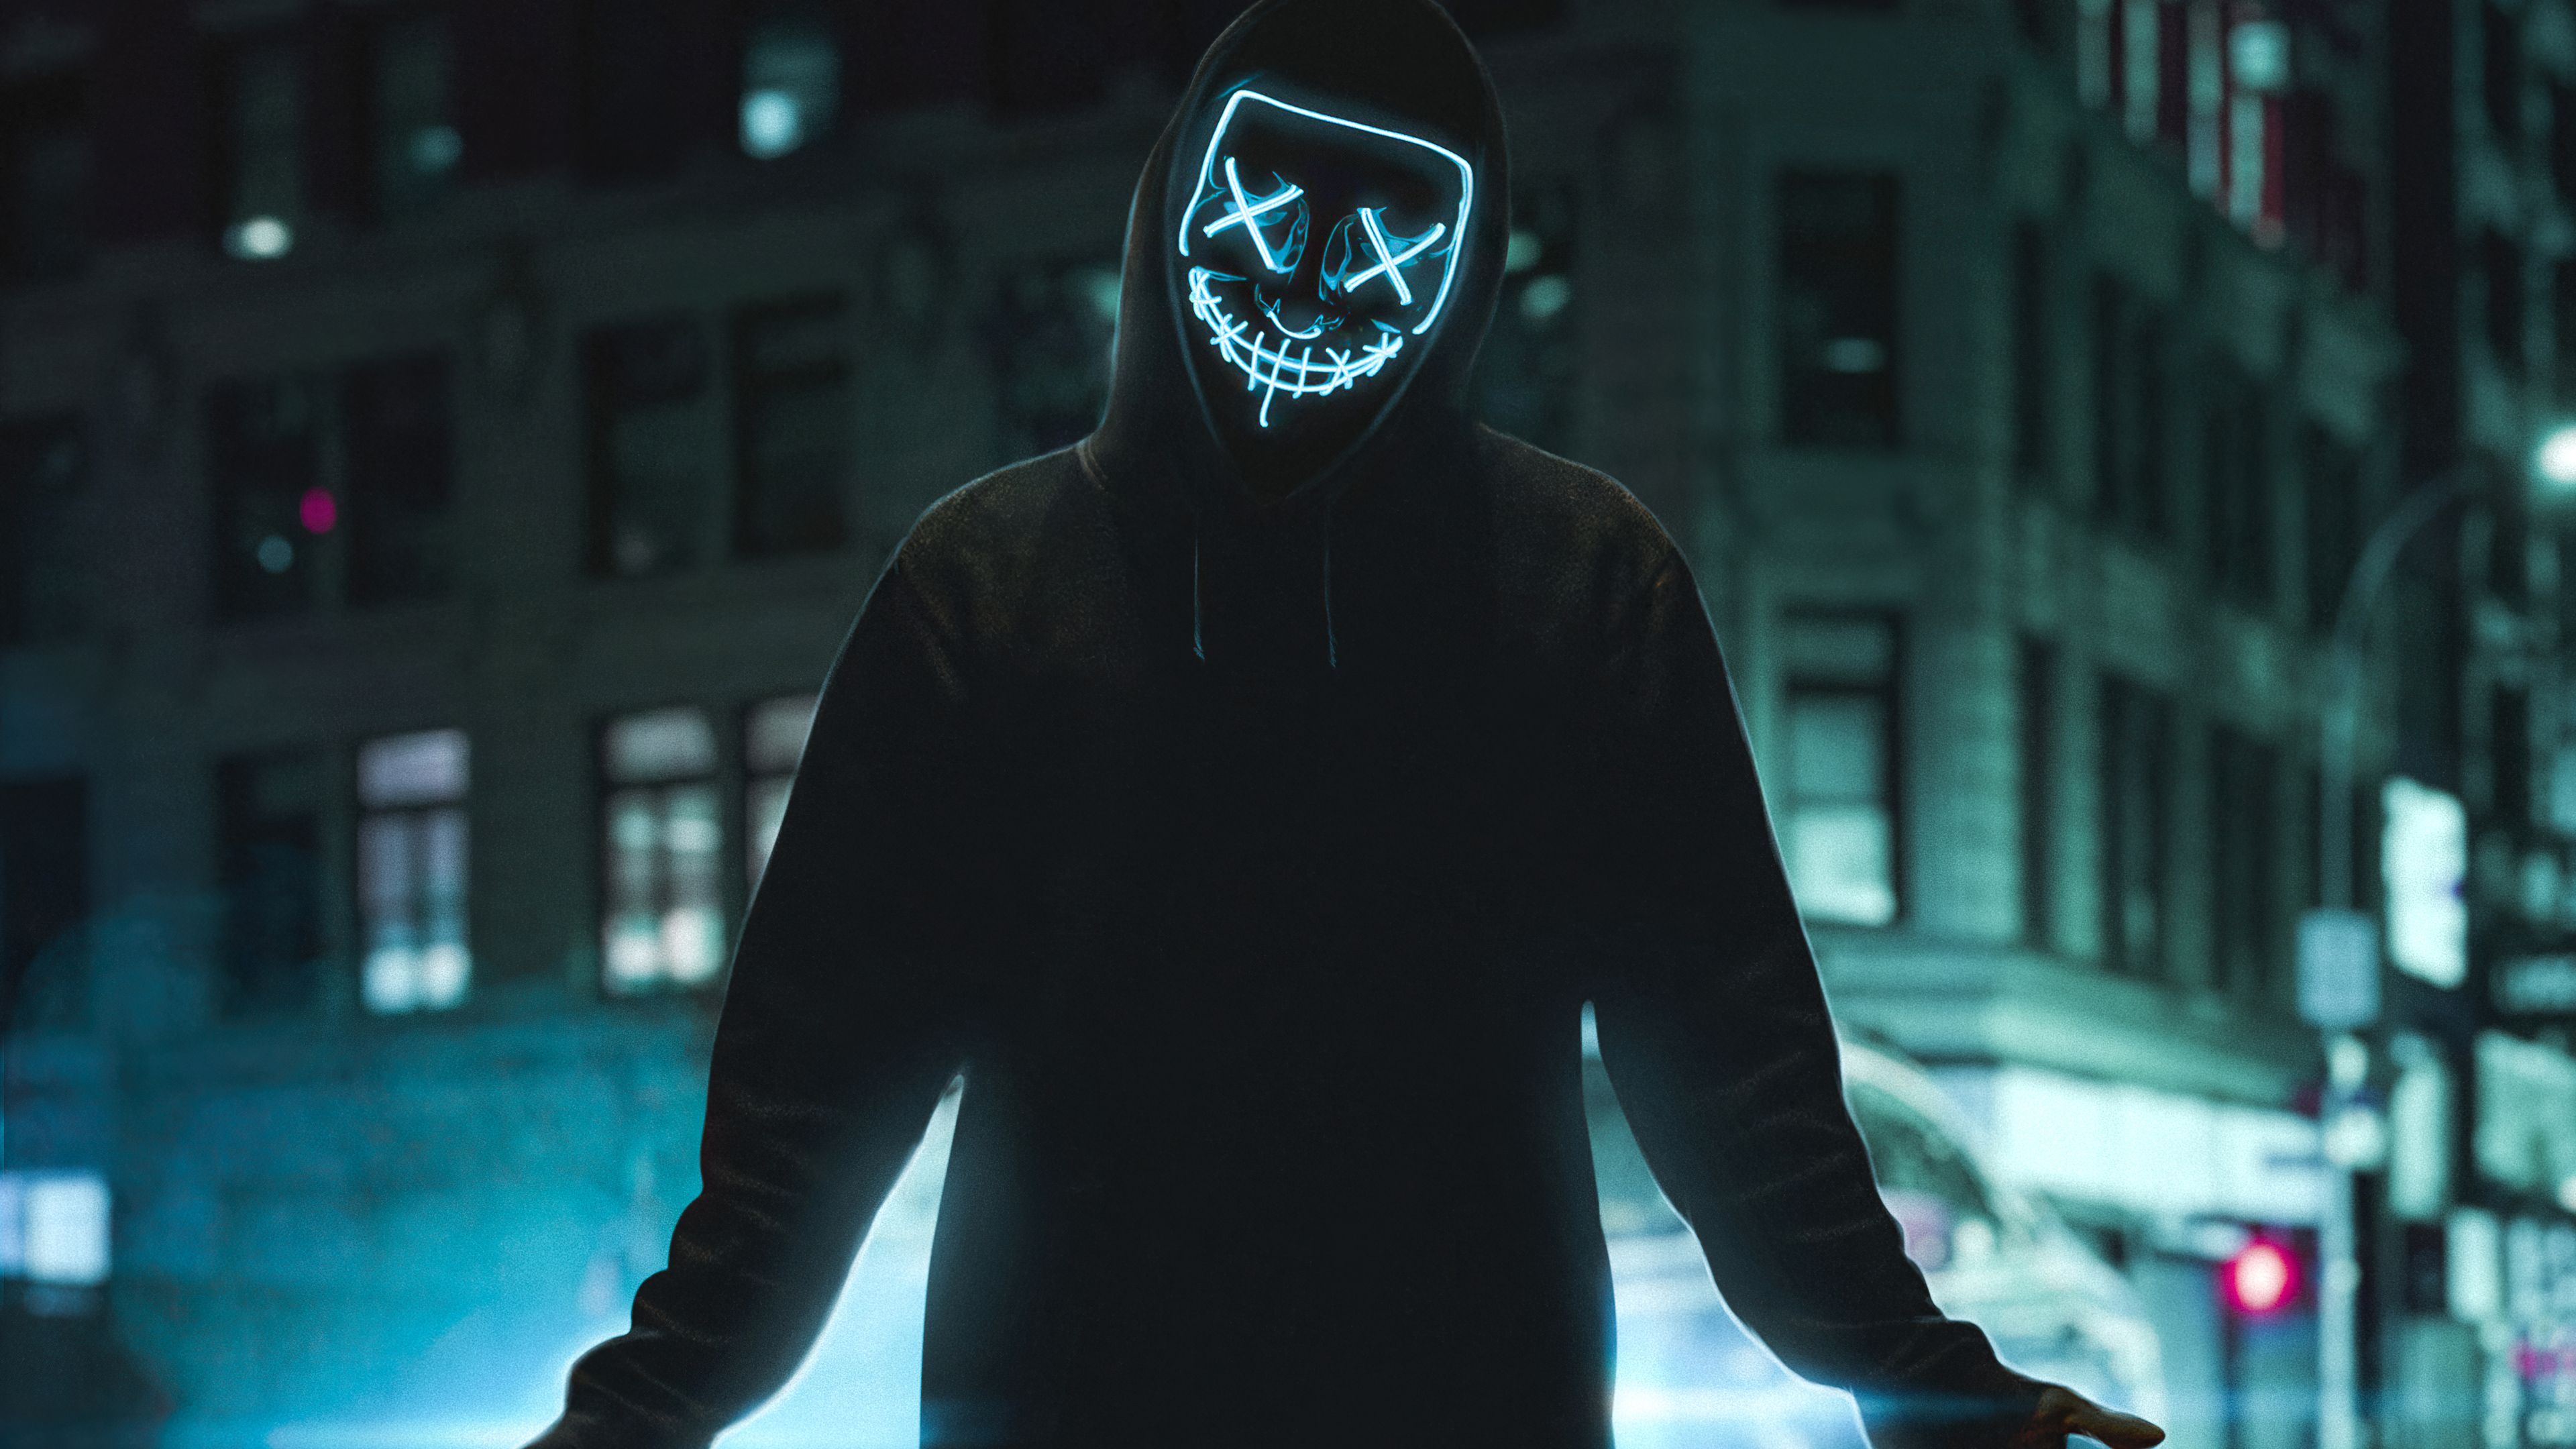 Neon Mask Guy Street 4k, HD Artist, 4k Wallpaper, Image, Background, Photo and Picture